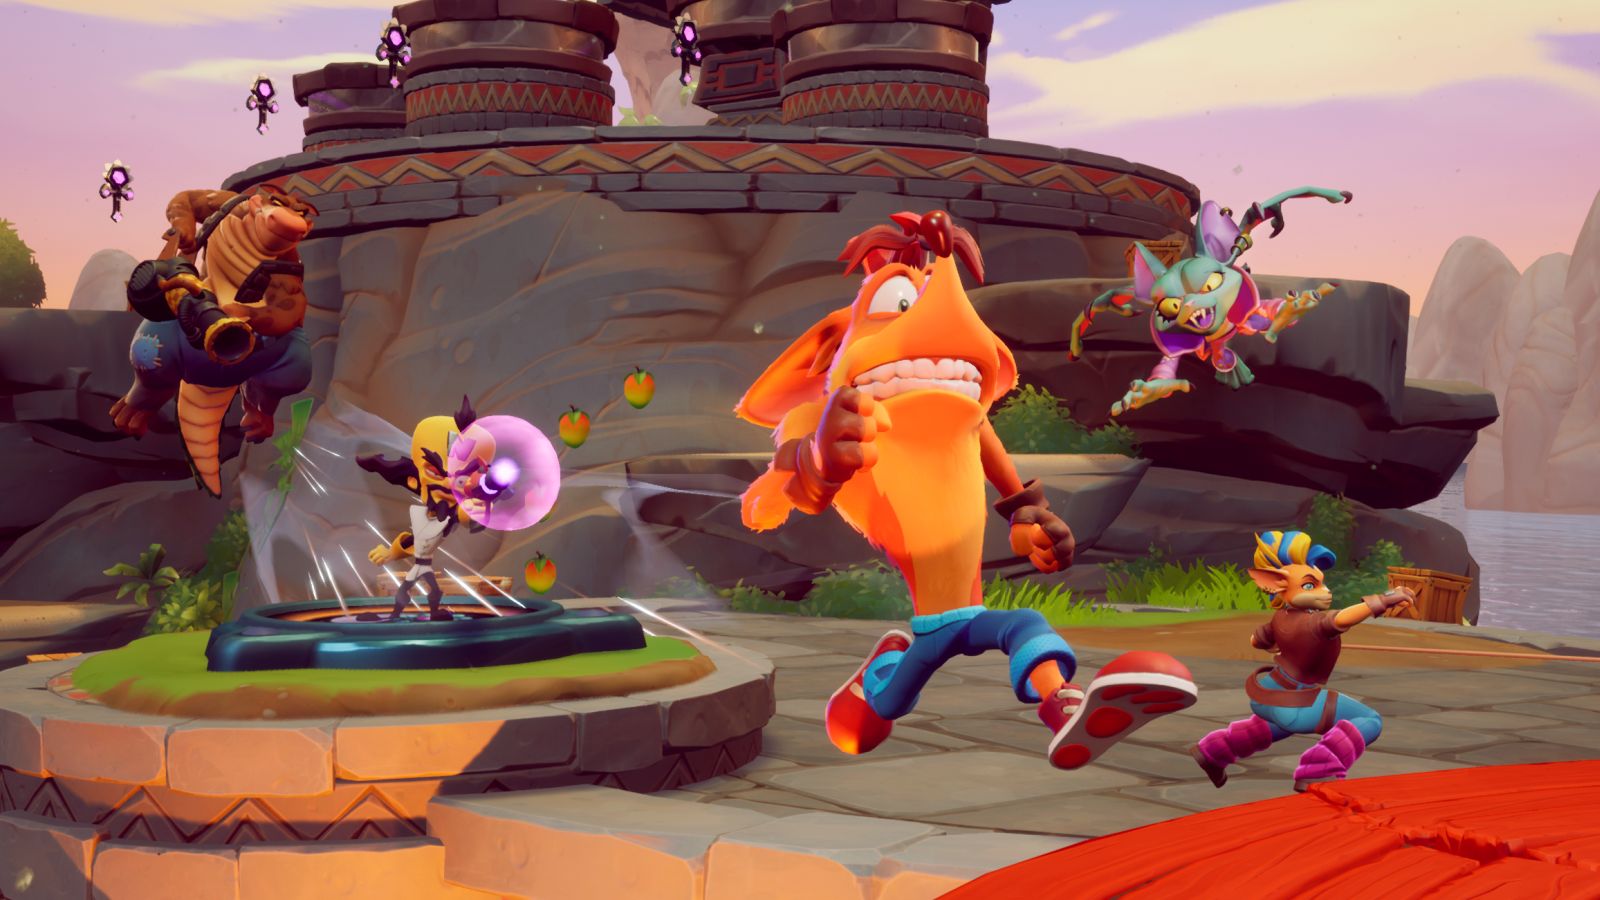 Crash Team Rumble Review – A Crateful Of Fun While It Lasts